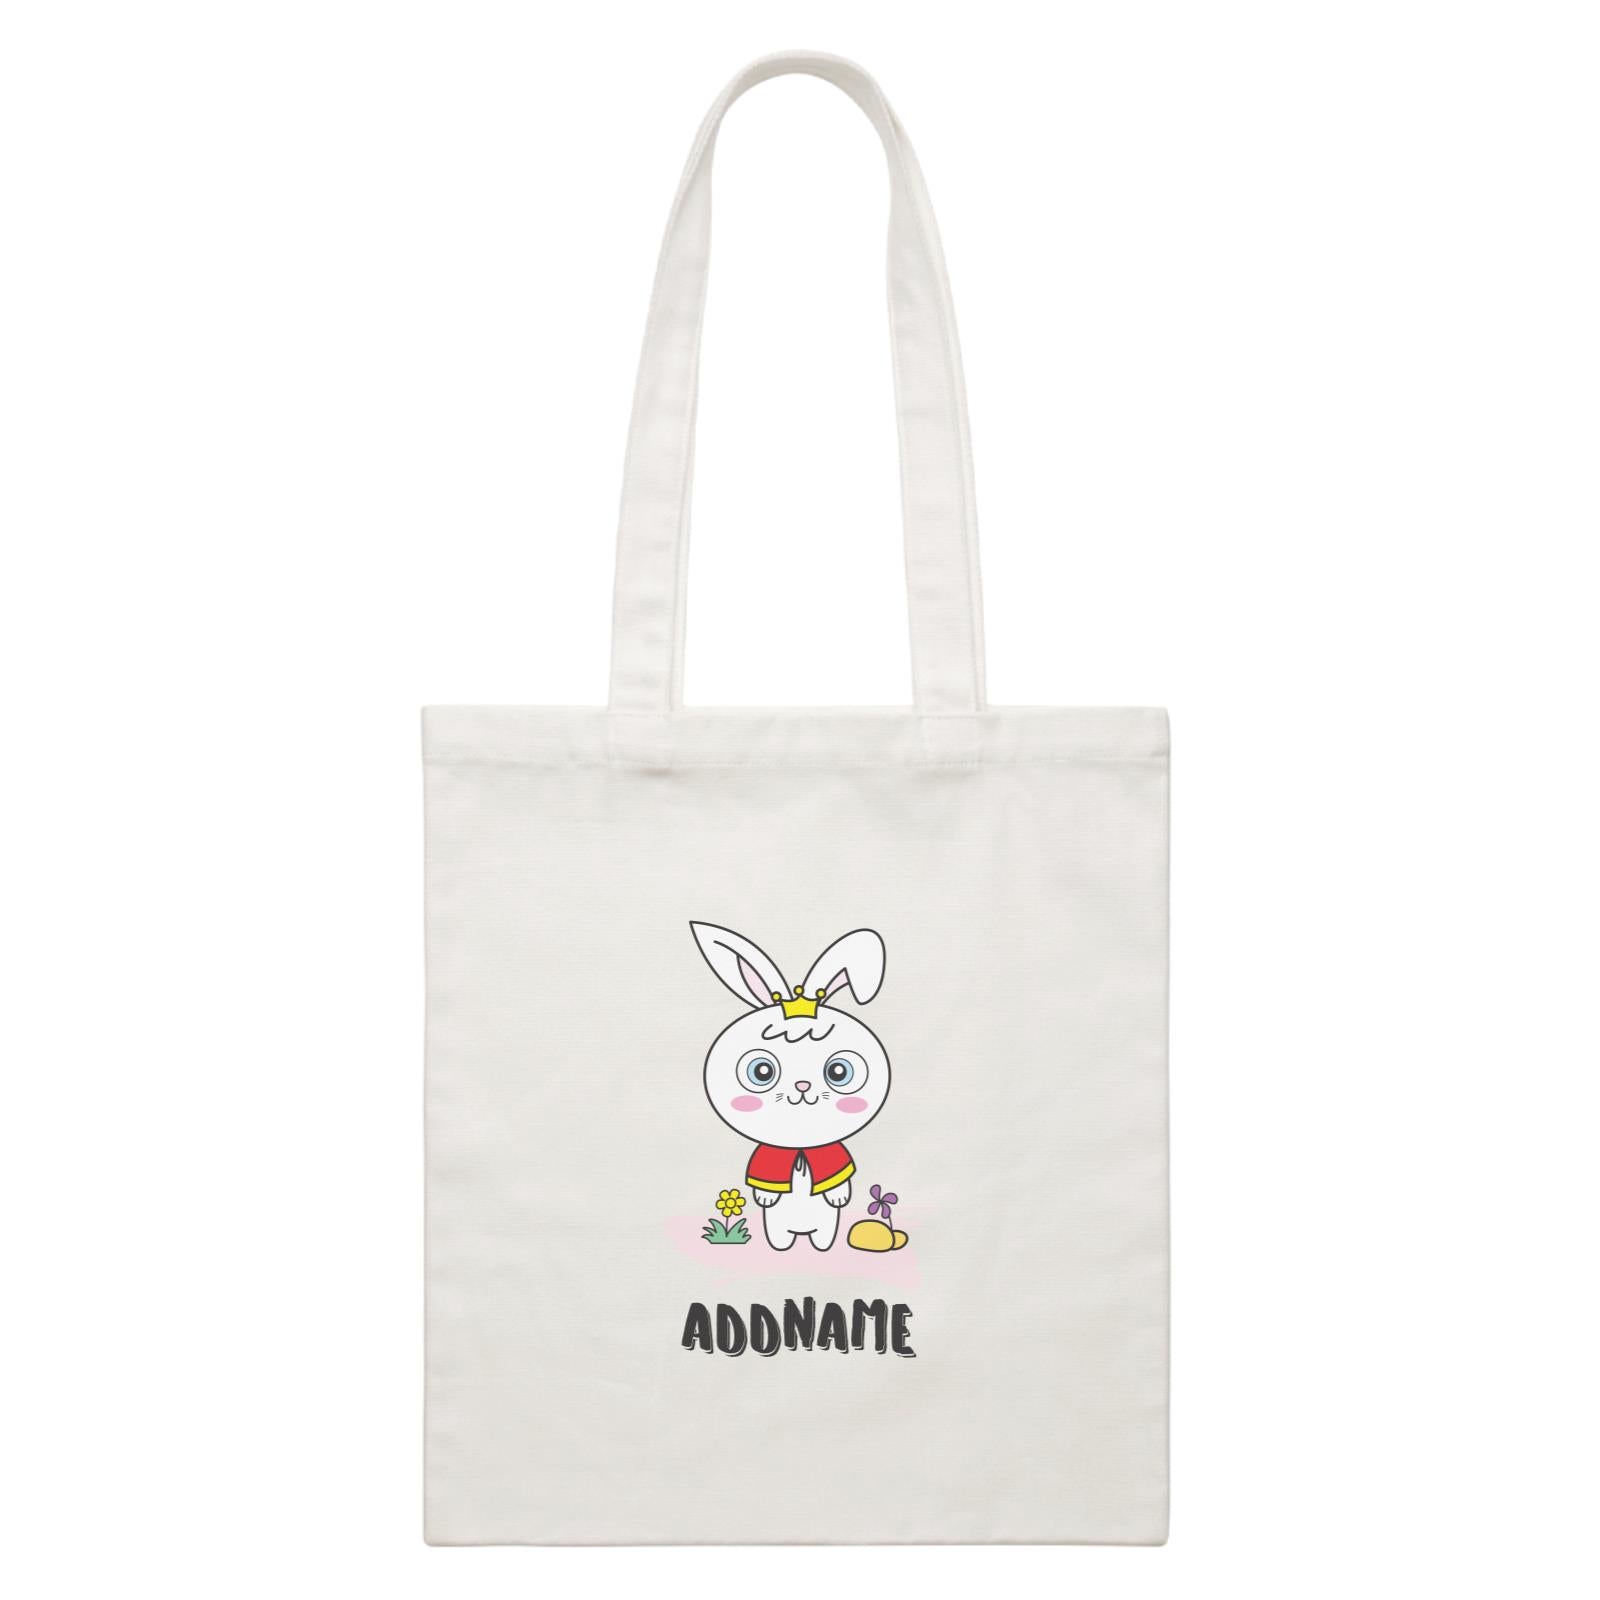 Cool Cute Animals Rabbit Rabbit With Crown Addname White Canvas Bag